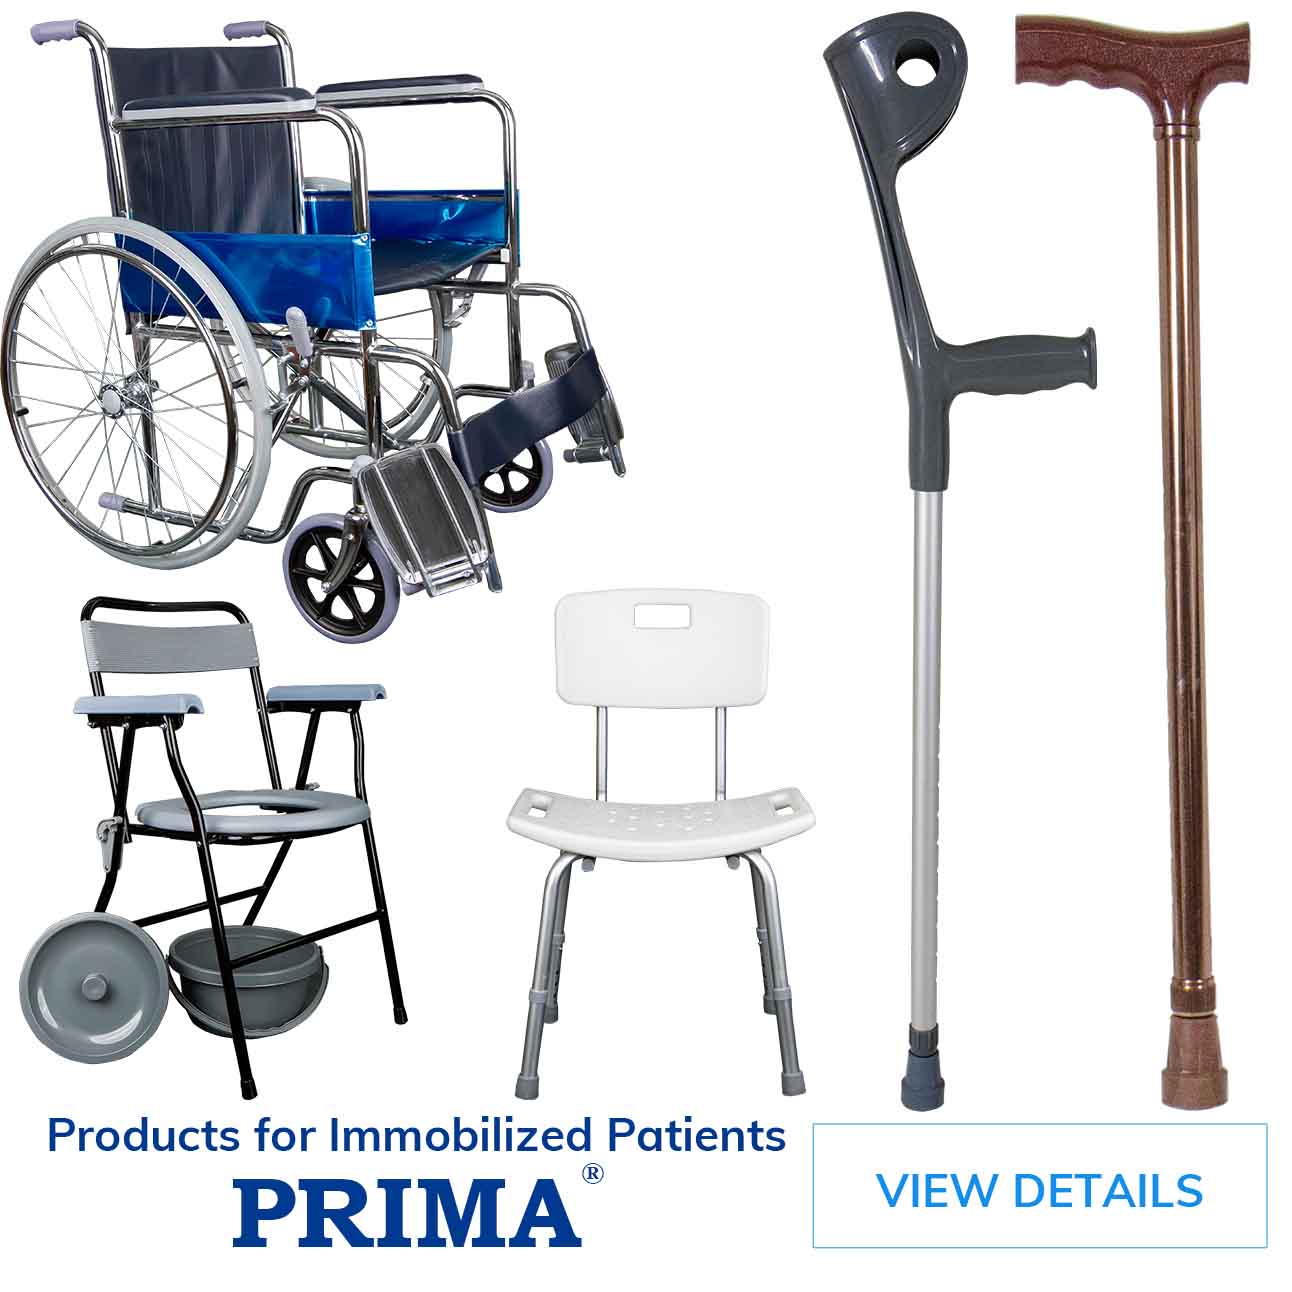 Products for Immobilized Patients